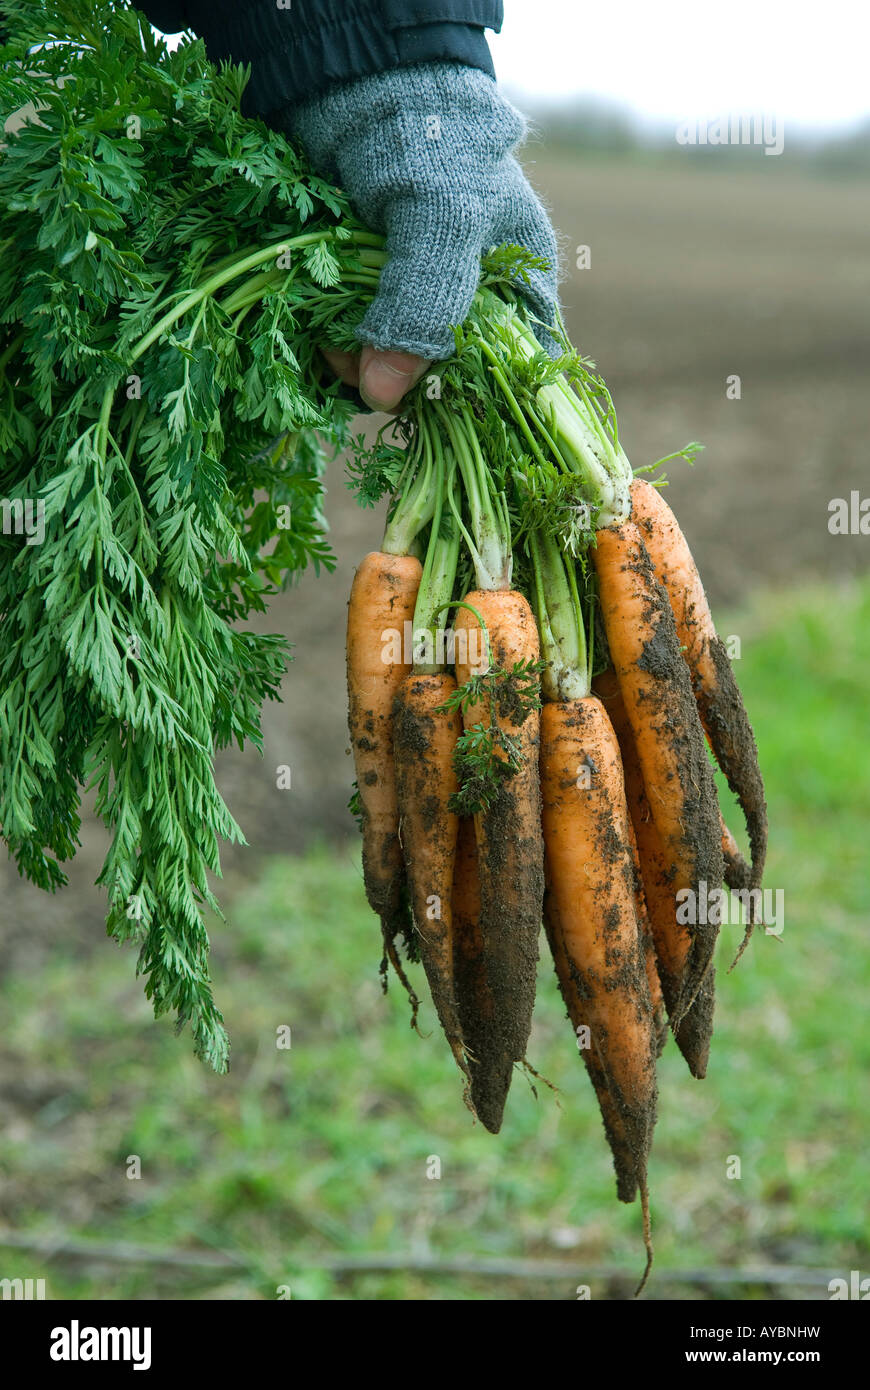 Female farmer holding organic carrots Banque D'Images